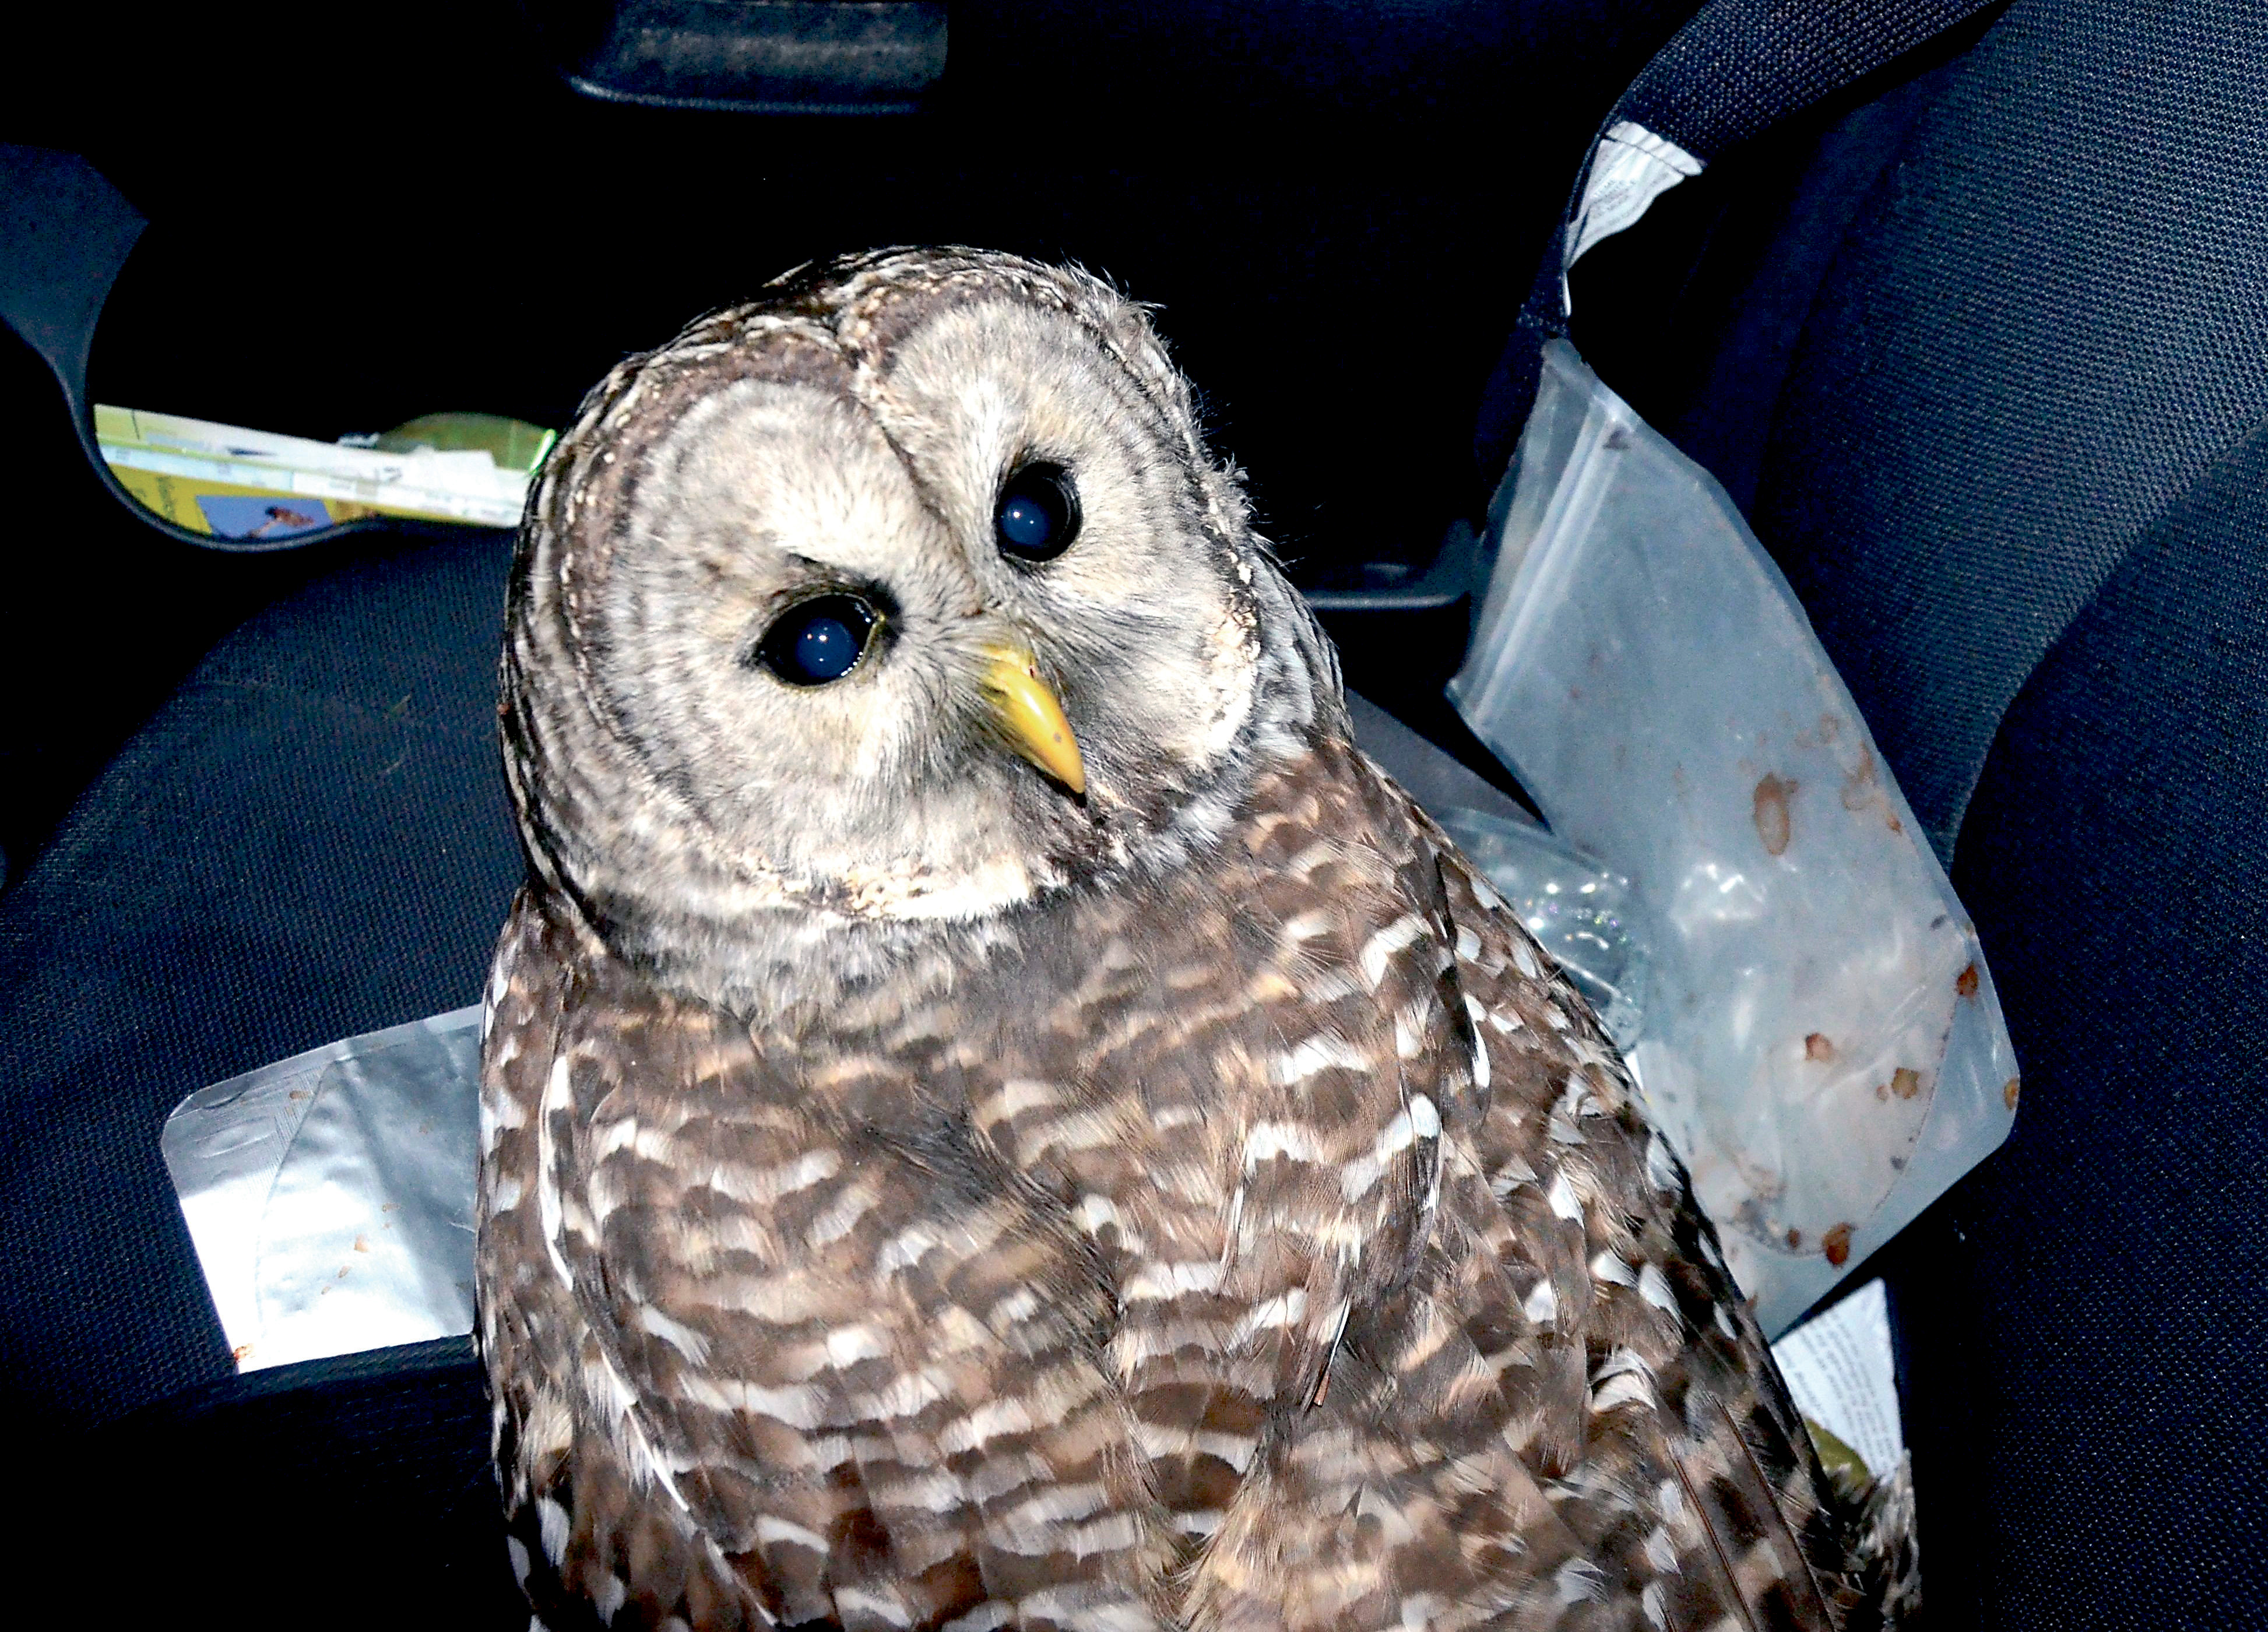 The dazed owl rides in the passenger seat of the car that it struck. Charlie Bermant/Peninsula Daily News